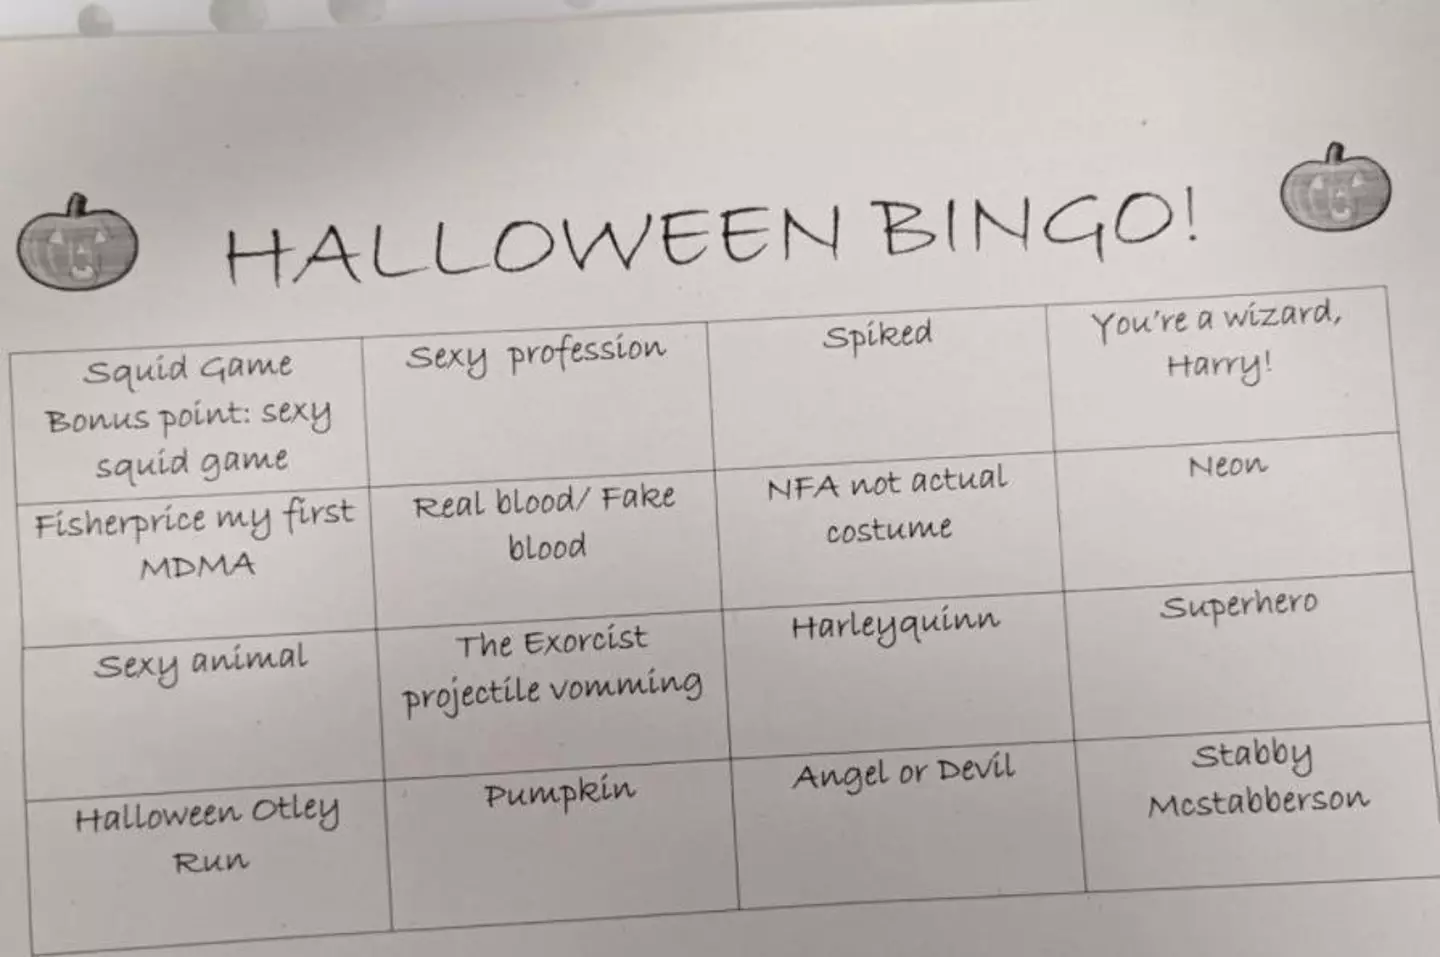 The Halloween Bingo game was clear for everyone to see (